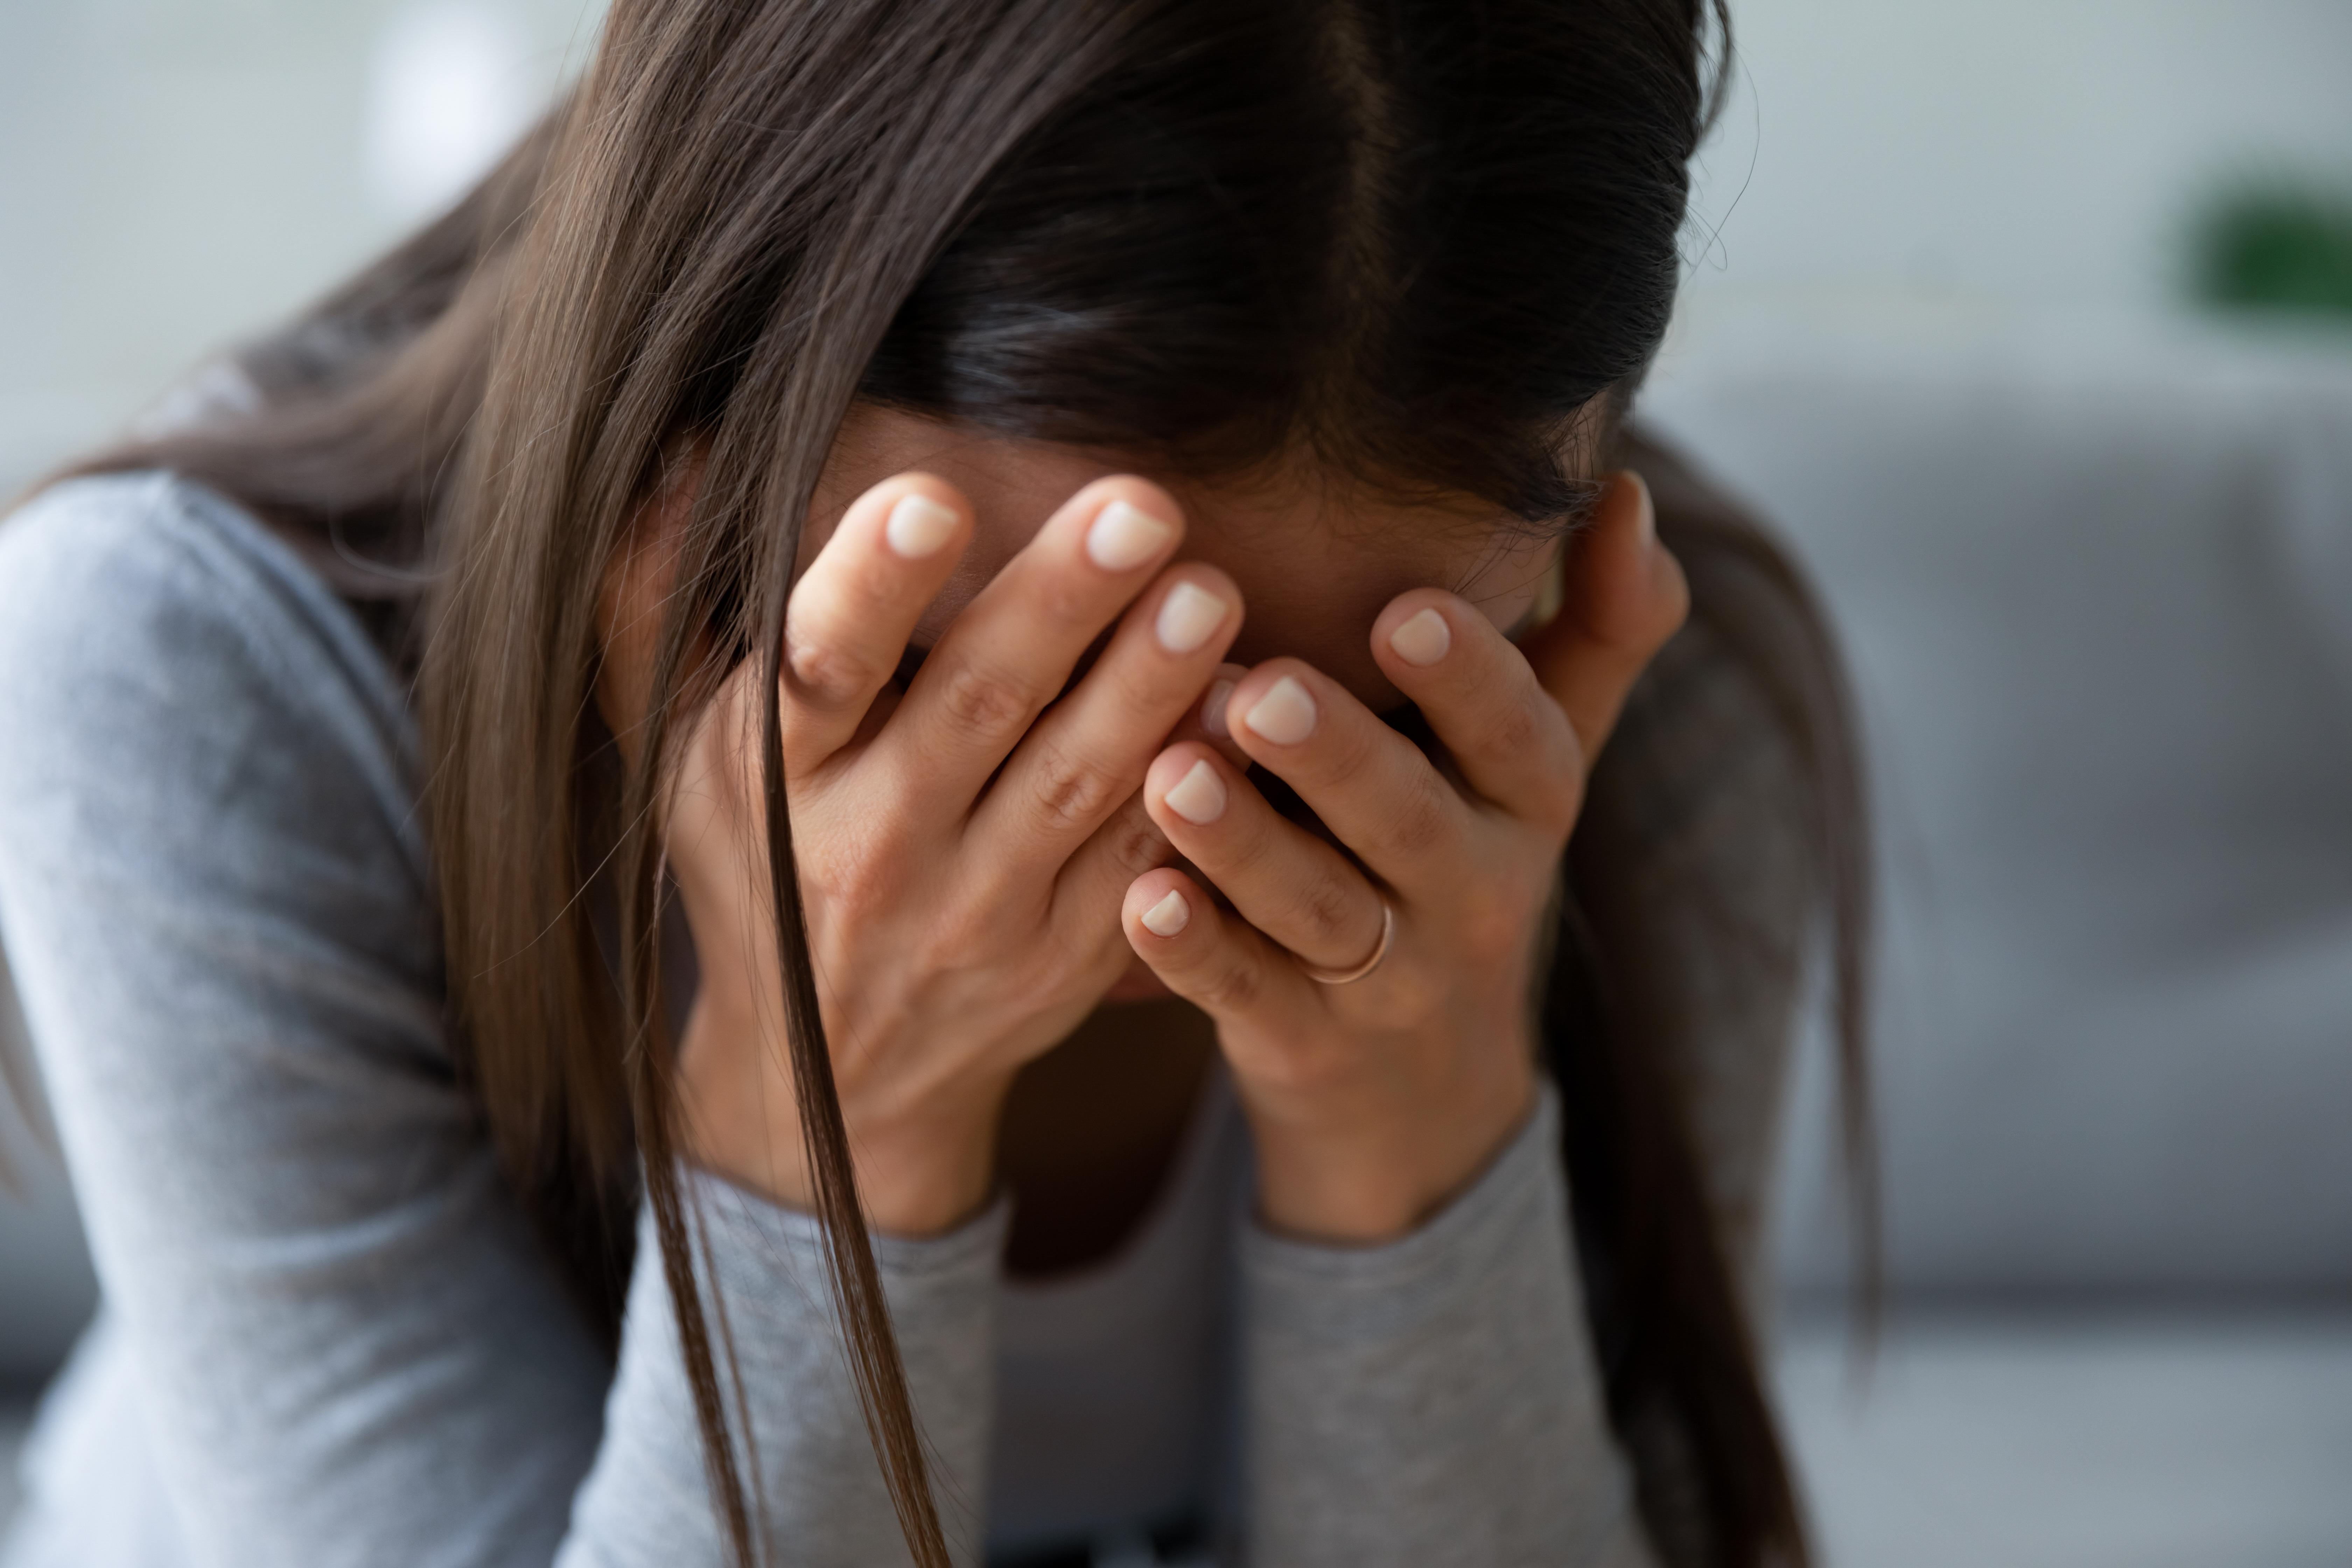 Young woman crying | Source: Shutterstock